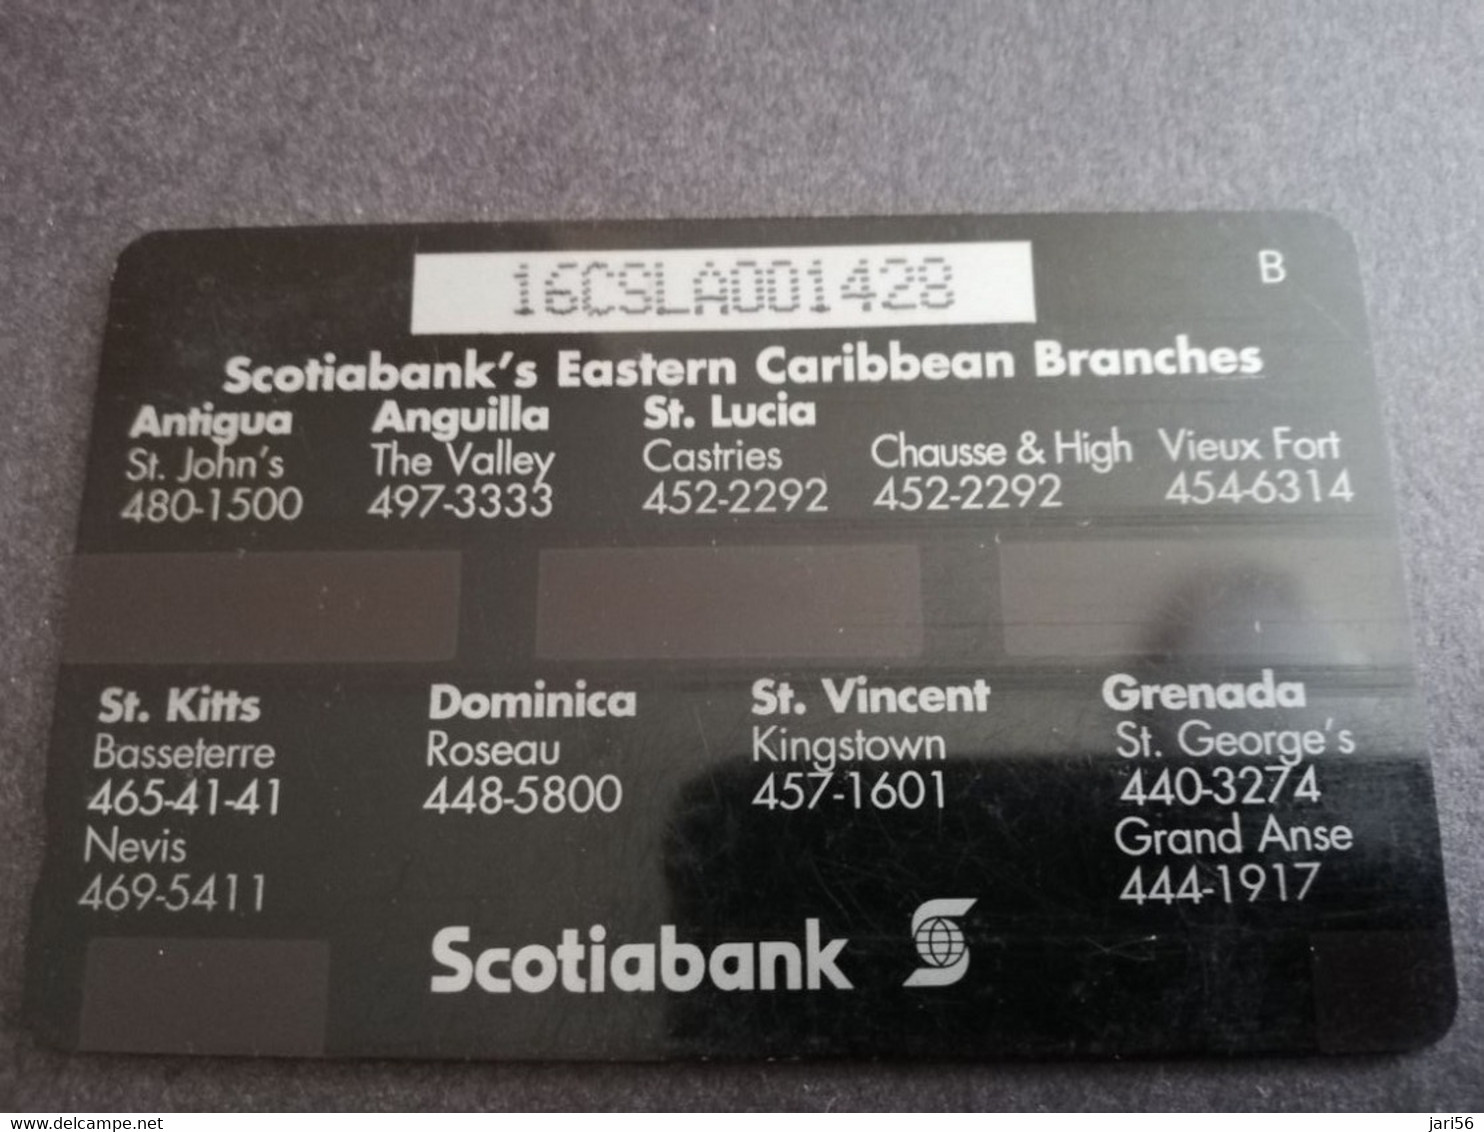 ST LUCIA    $ 20  CABLE & WIRELESS   SCOTIABANK    16CSLA   Fine Used Card ** 6125** - St. Lucia